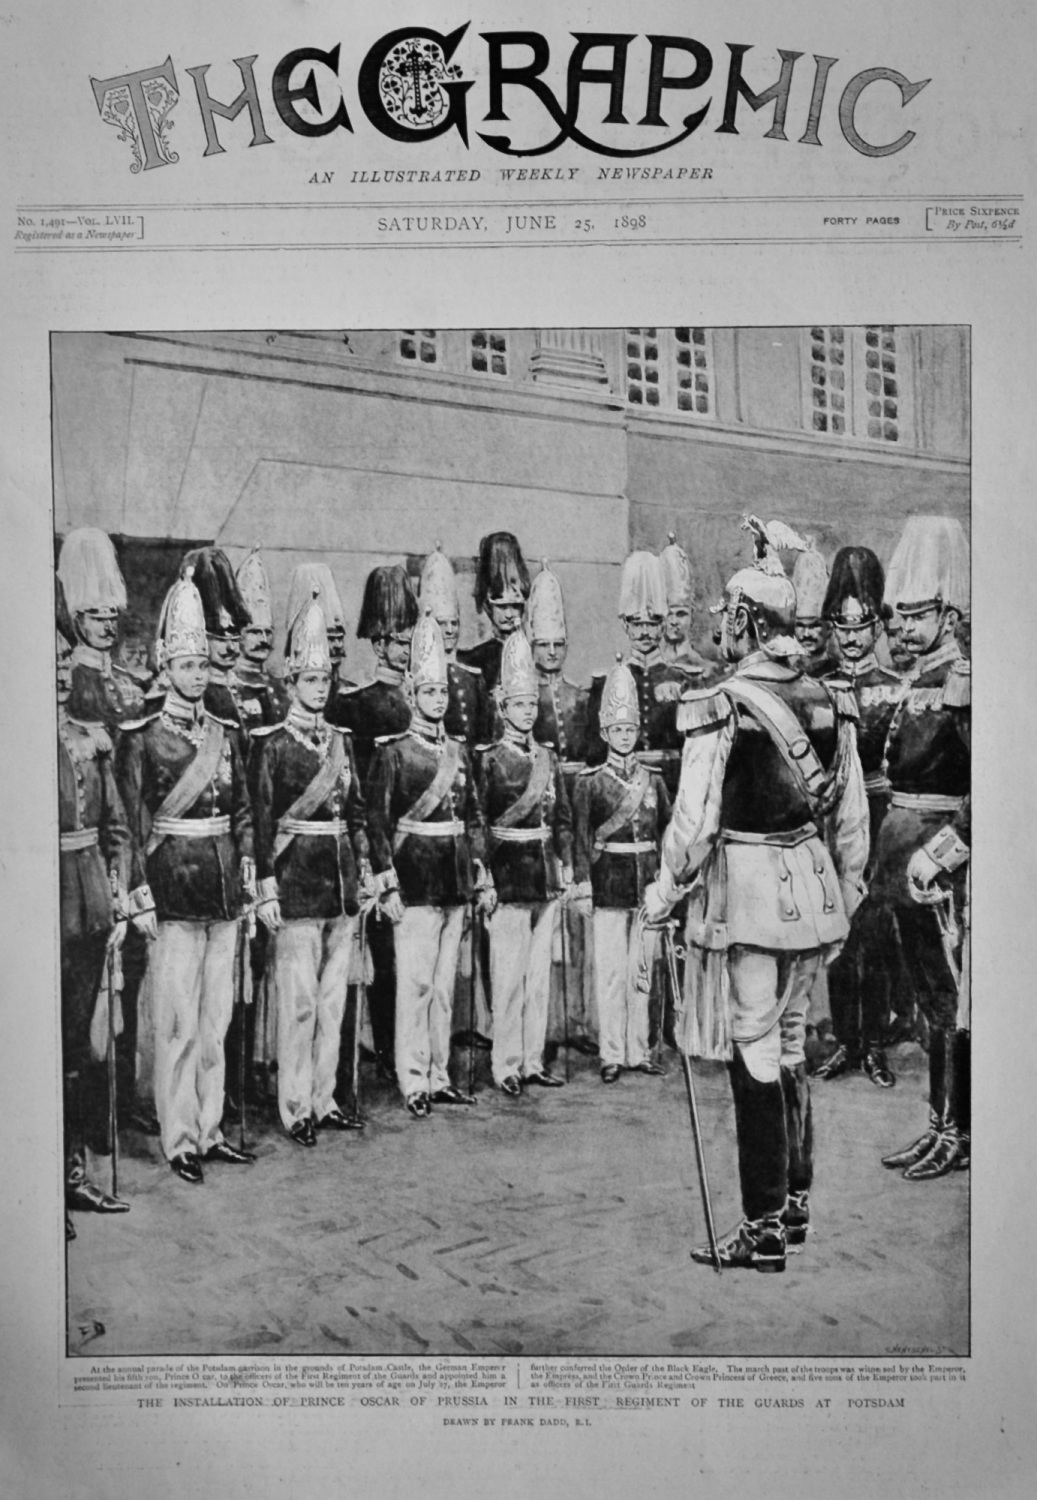 The Installation of Prince Oscar of Prussia in the First Regiment of the Gu